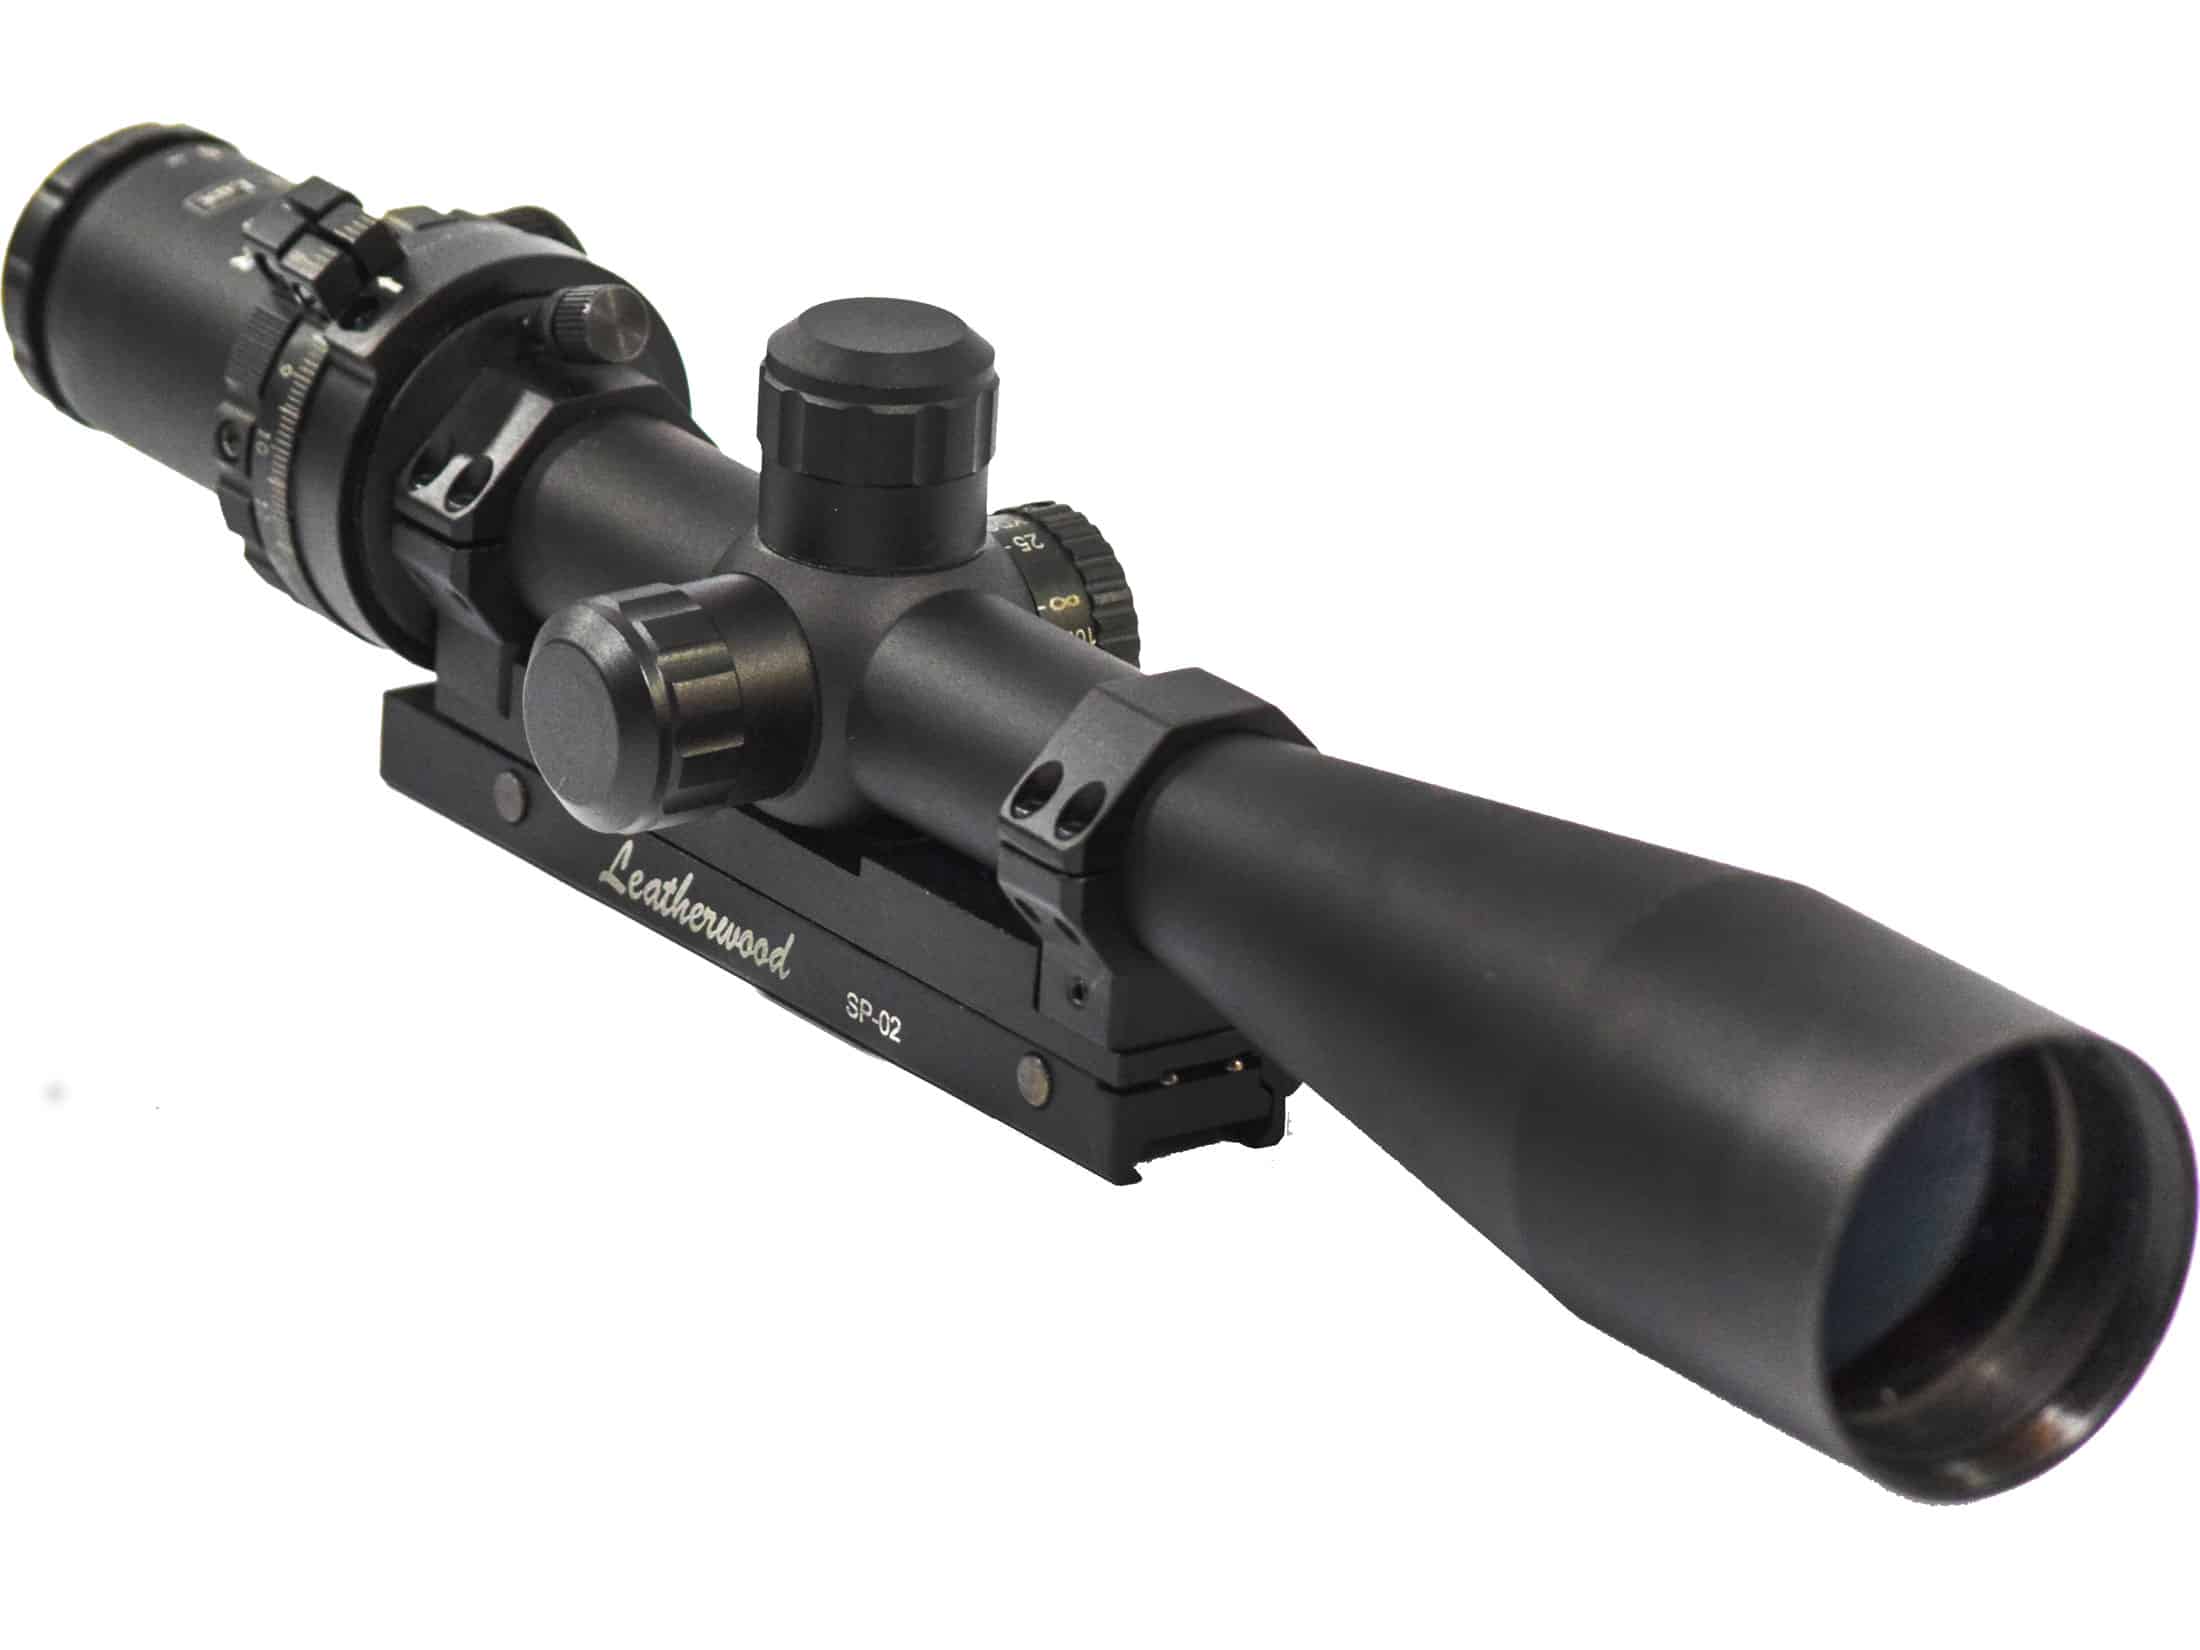 Leatherwood Hi-Lux Camputer ART M-1200 Tactical Rifle Scope 30mm Tube 6-24x 50mm 1/8 MOA Adjustments Side Focus Illuminated XLR Ranging Reticle with Weaver Style Base and Rings Matte For Sale